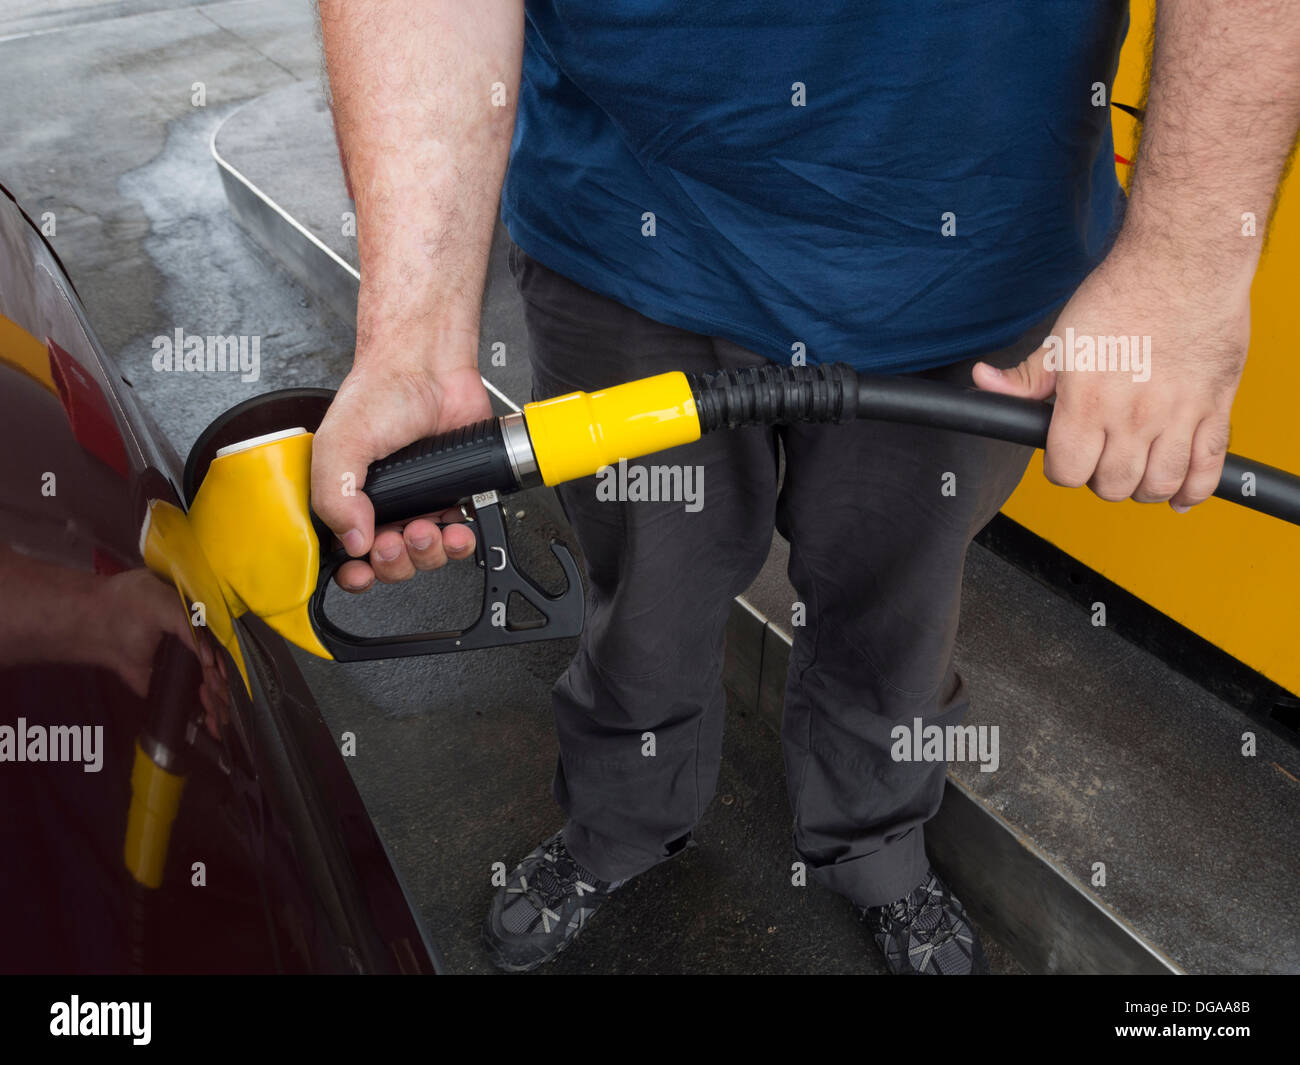 Man pumping gas at a gas station Stock Photo